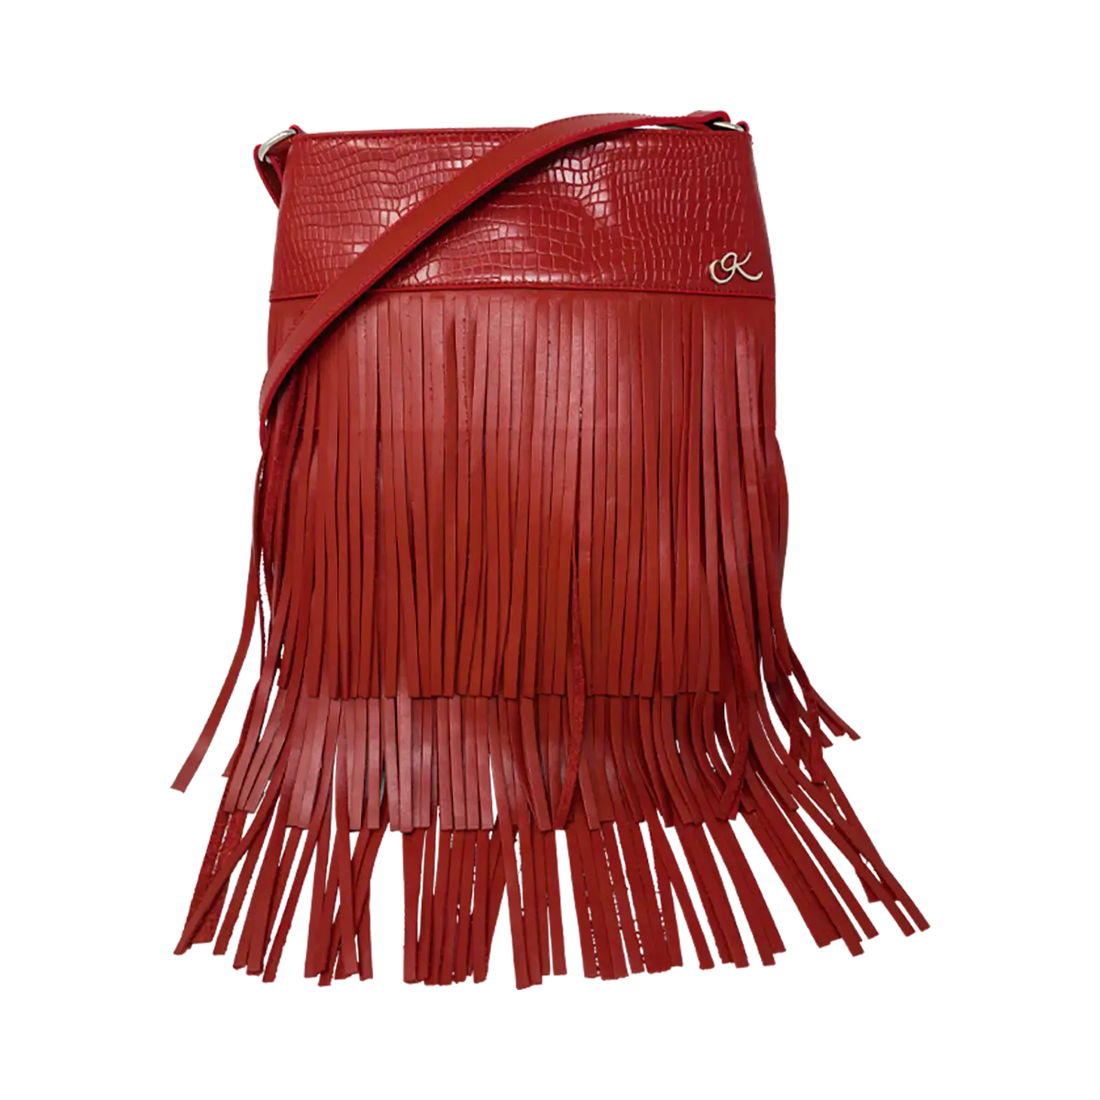 red leather shoulder bag with 3 layers of fringe. Fashion accessories, for women in San Diego, CA.